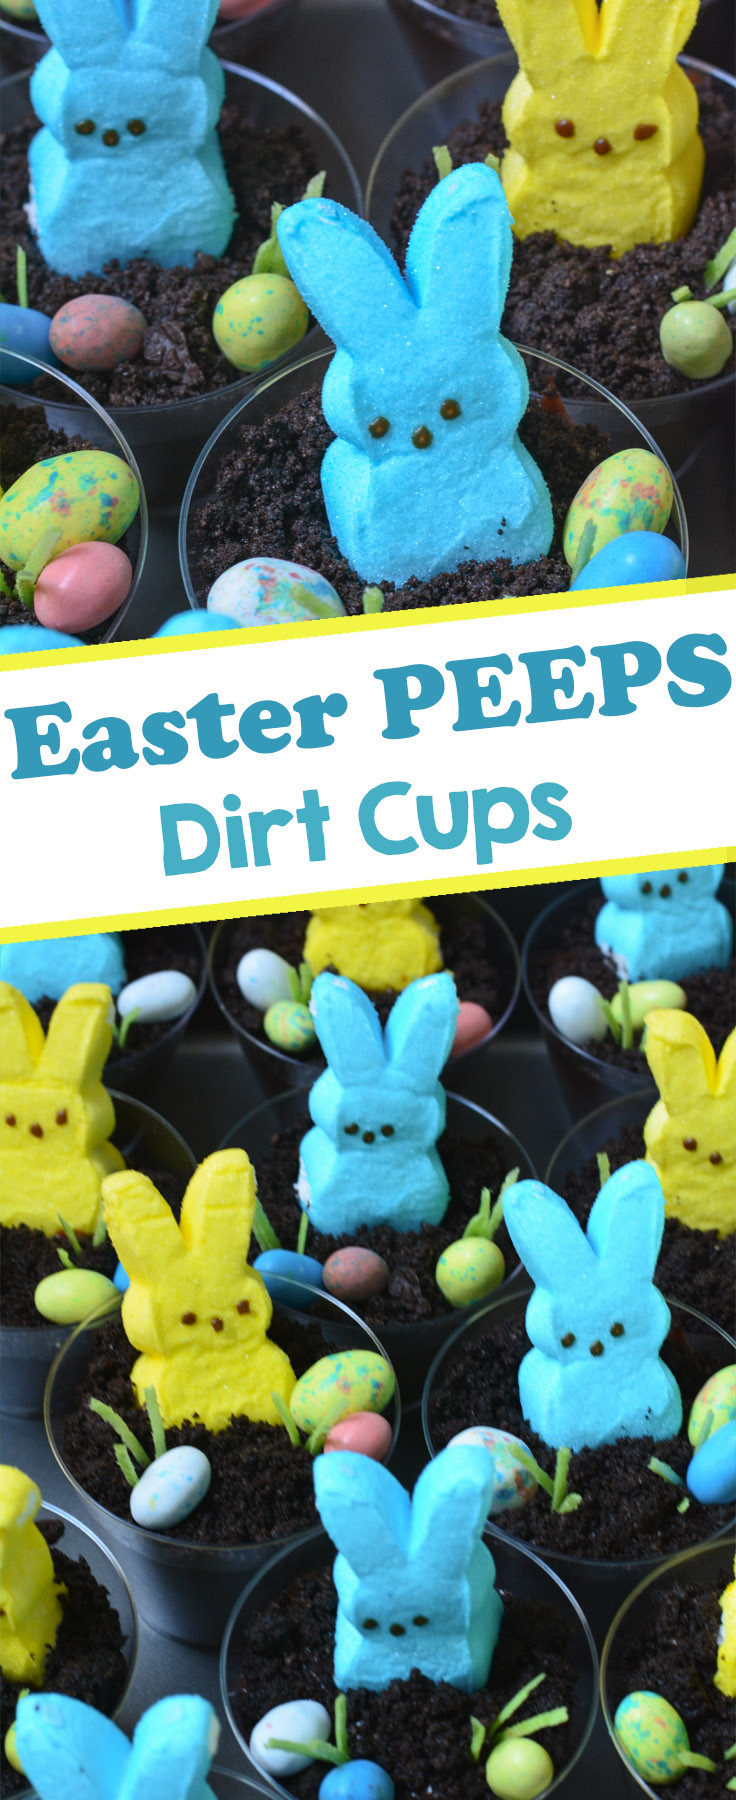 Easter Desserts With Peeps
 PEEPS Easter Bunny Dirt Cups